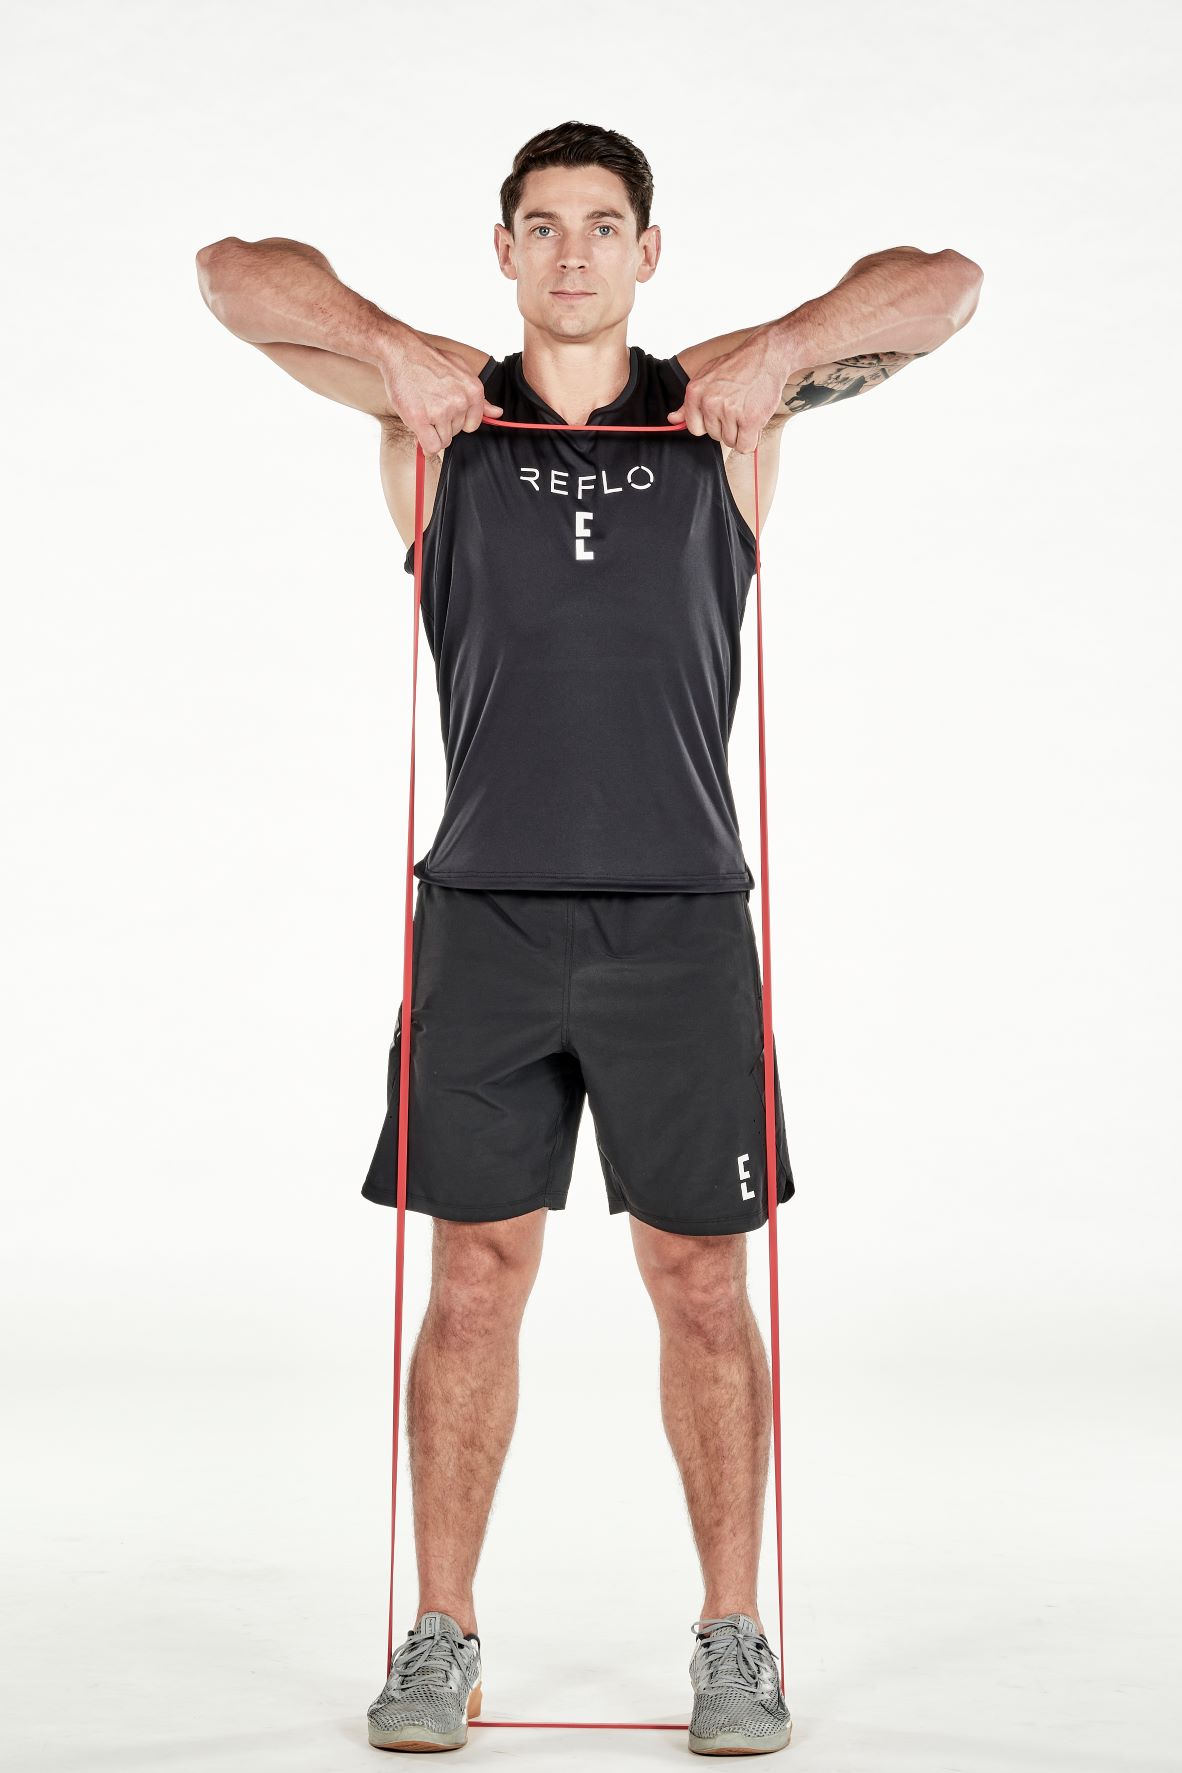 man demonstrating step two of upright row; he stands upright, both hands holding a band that is secured under his feet; he pulls up on the band until level with his shoulders; he wears a black fitness vest, black shorts and trainers